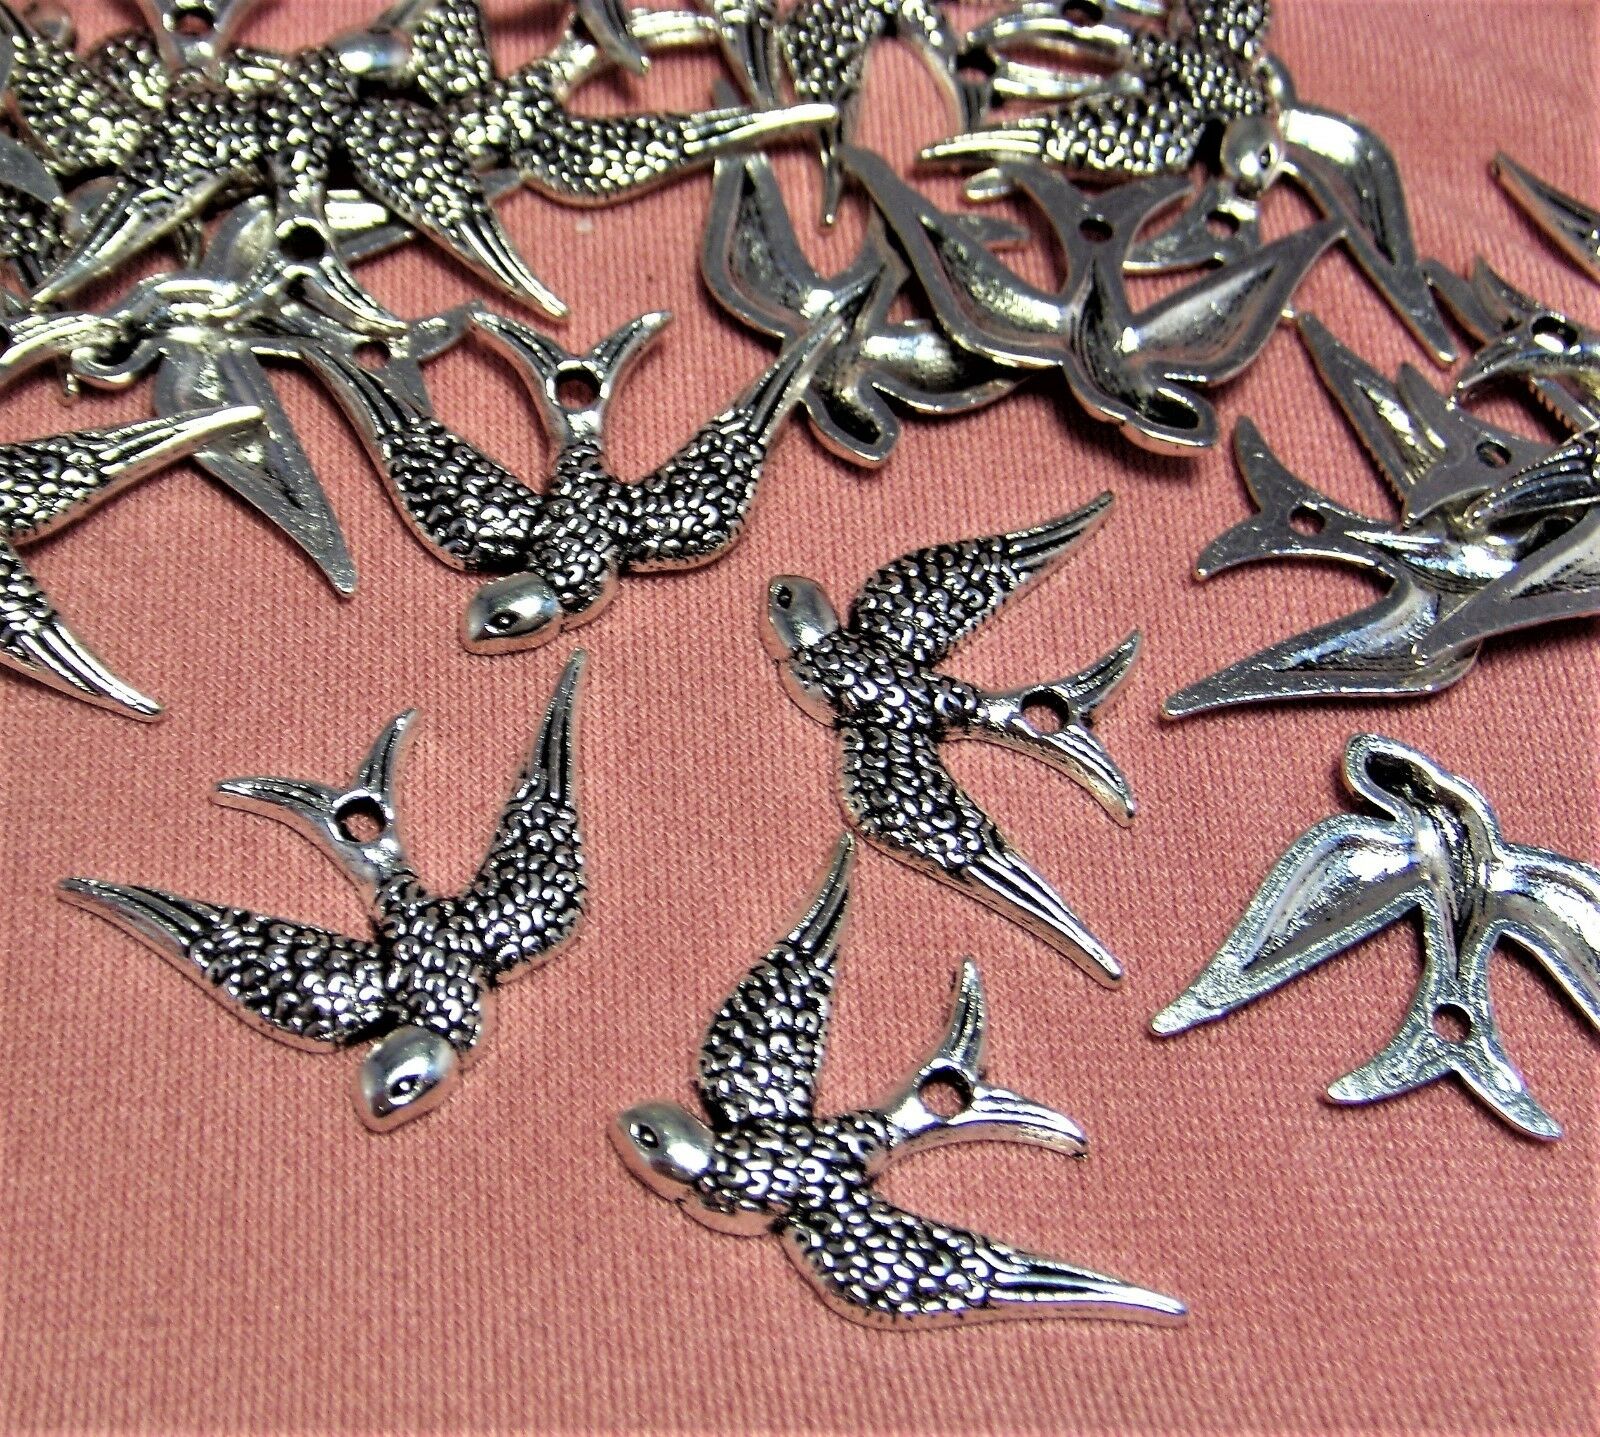 50 Silver Metal Bird Charms-pendants-drops-findings-jewelry Making Supplies Lot